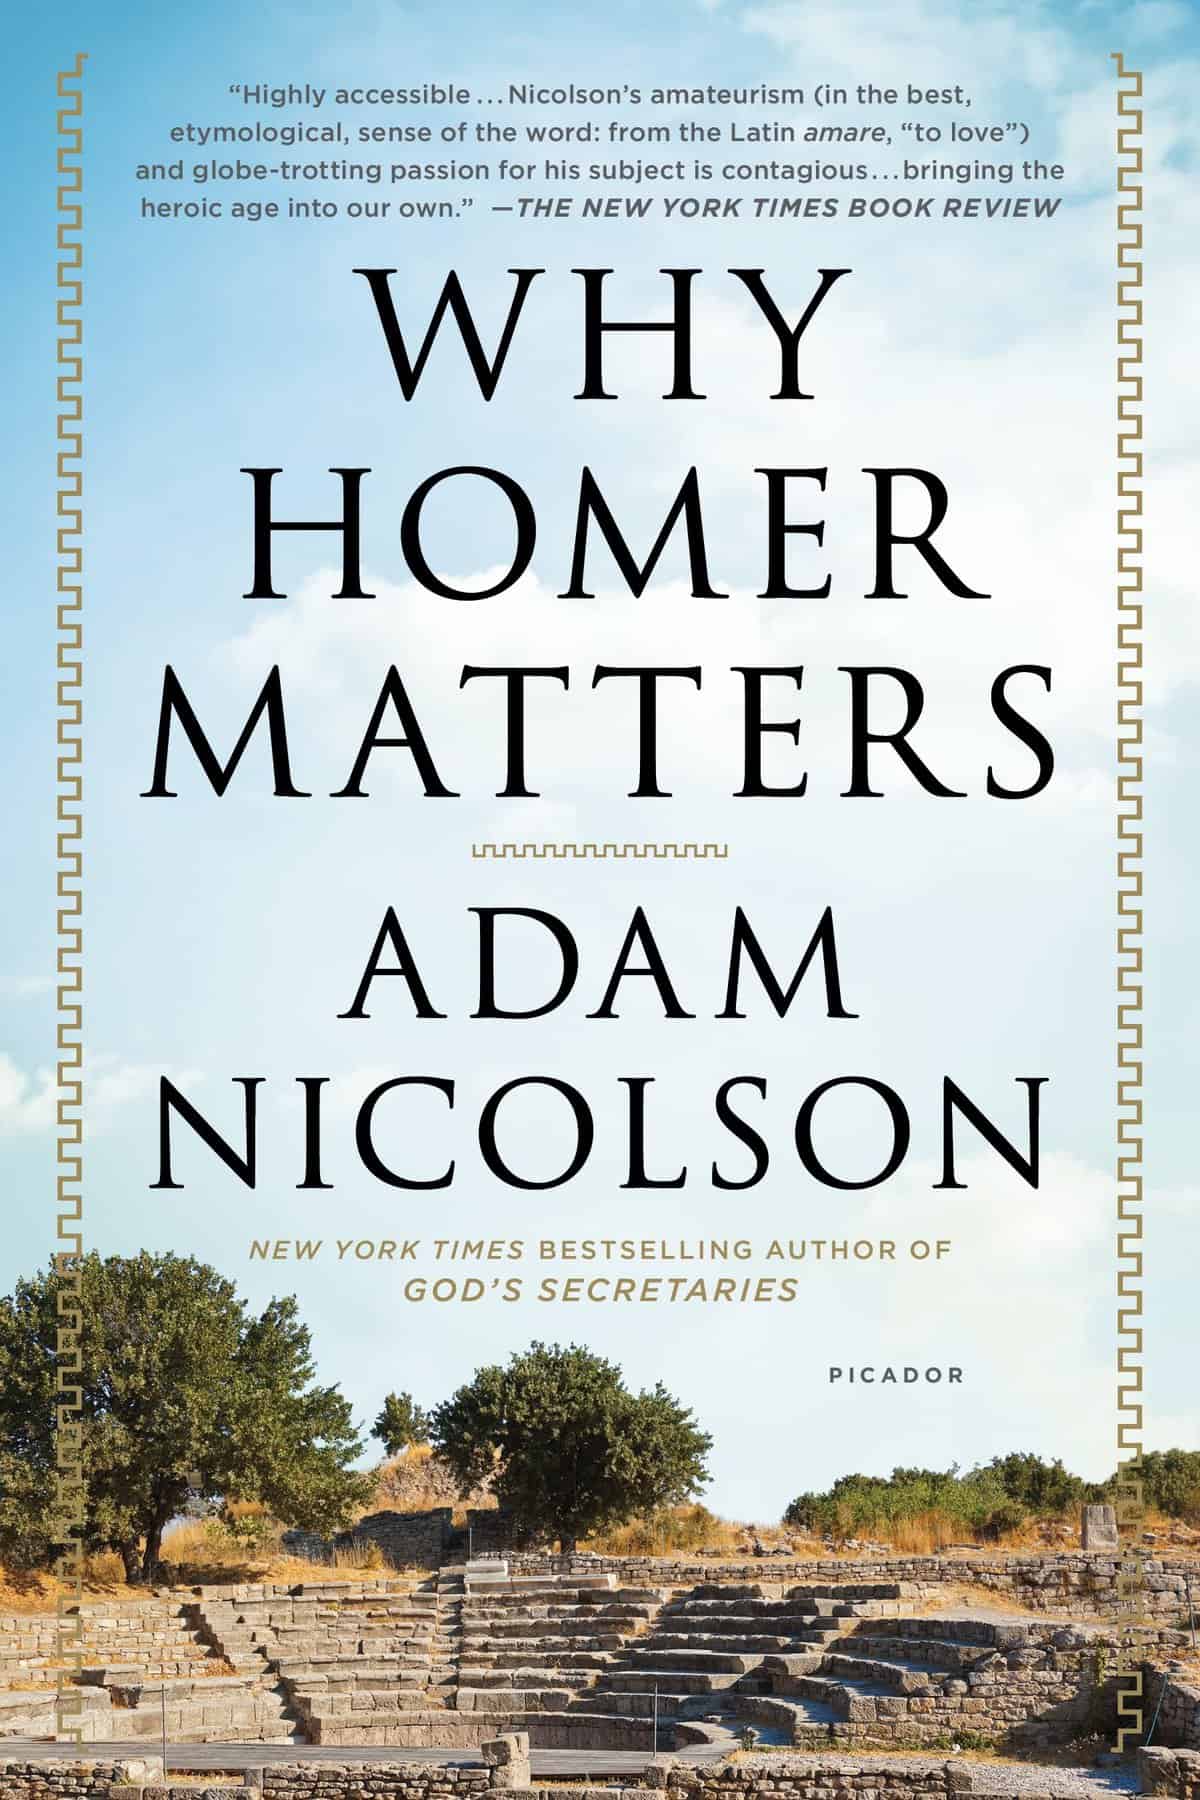 Why Homer Matters – A History by Adam Nicolson